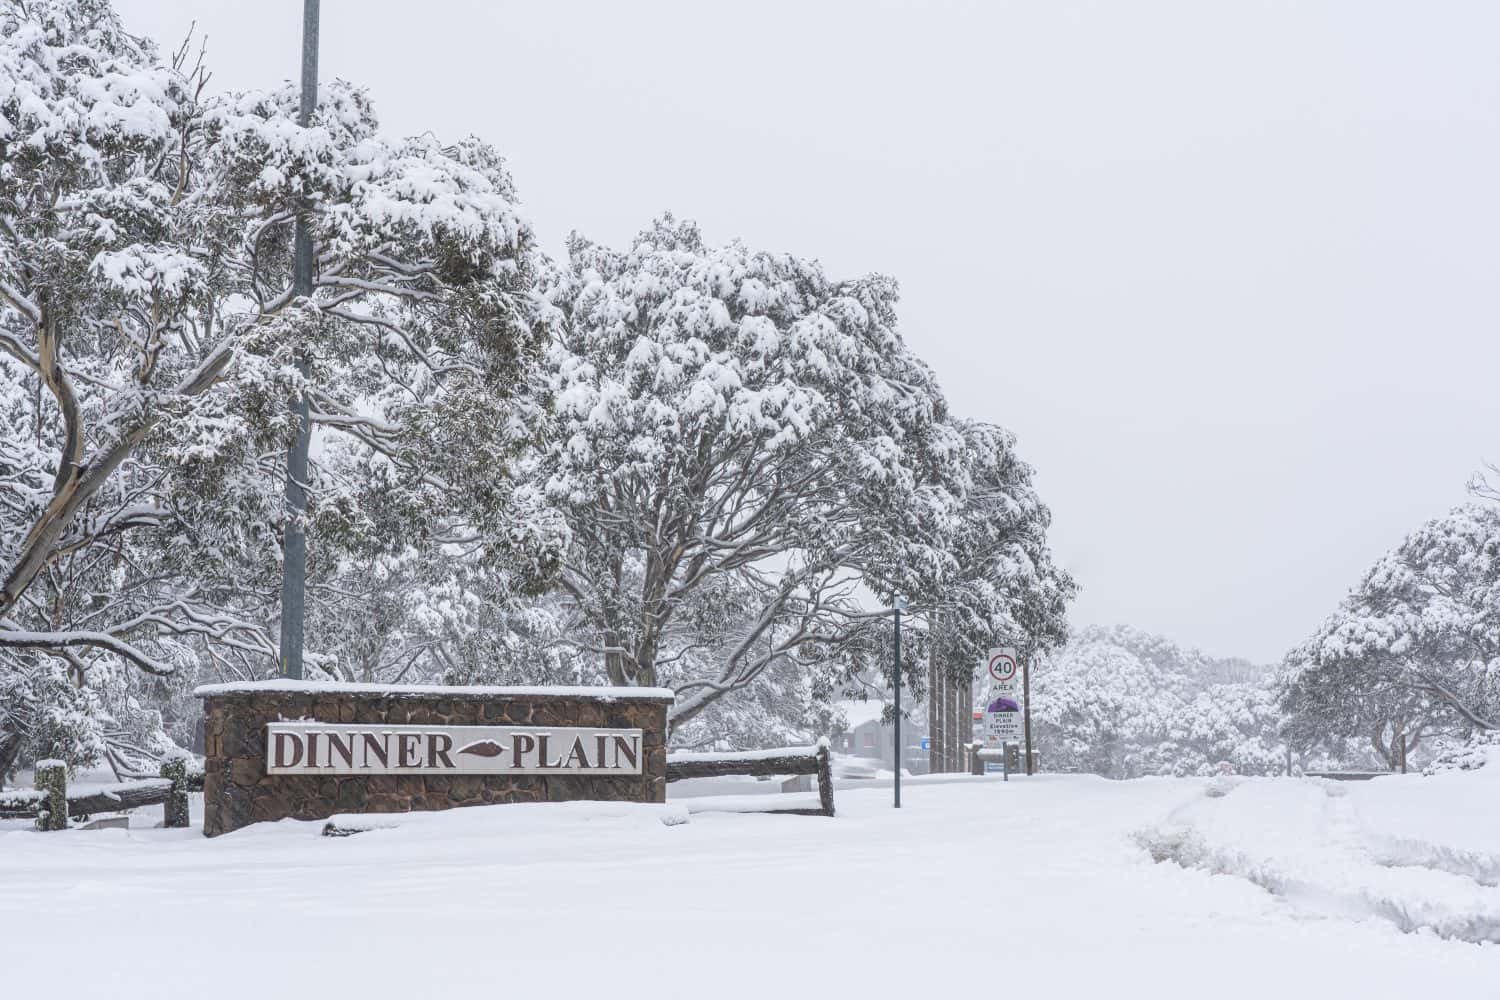 The entrance area to Dinner Plain in Victoria, Australia with a stone sign in snowy winter